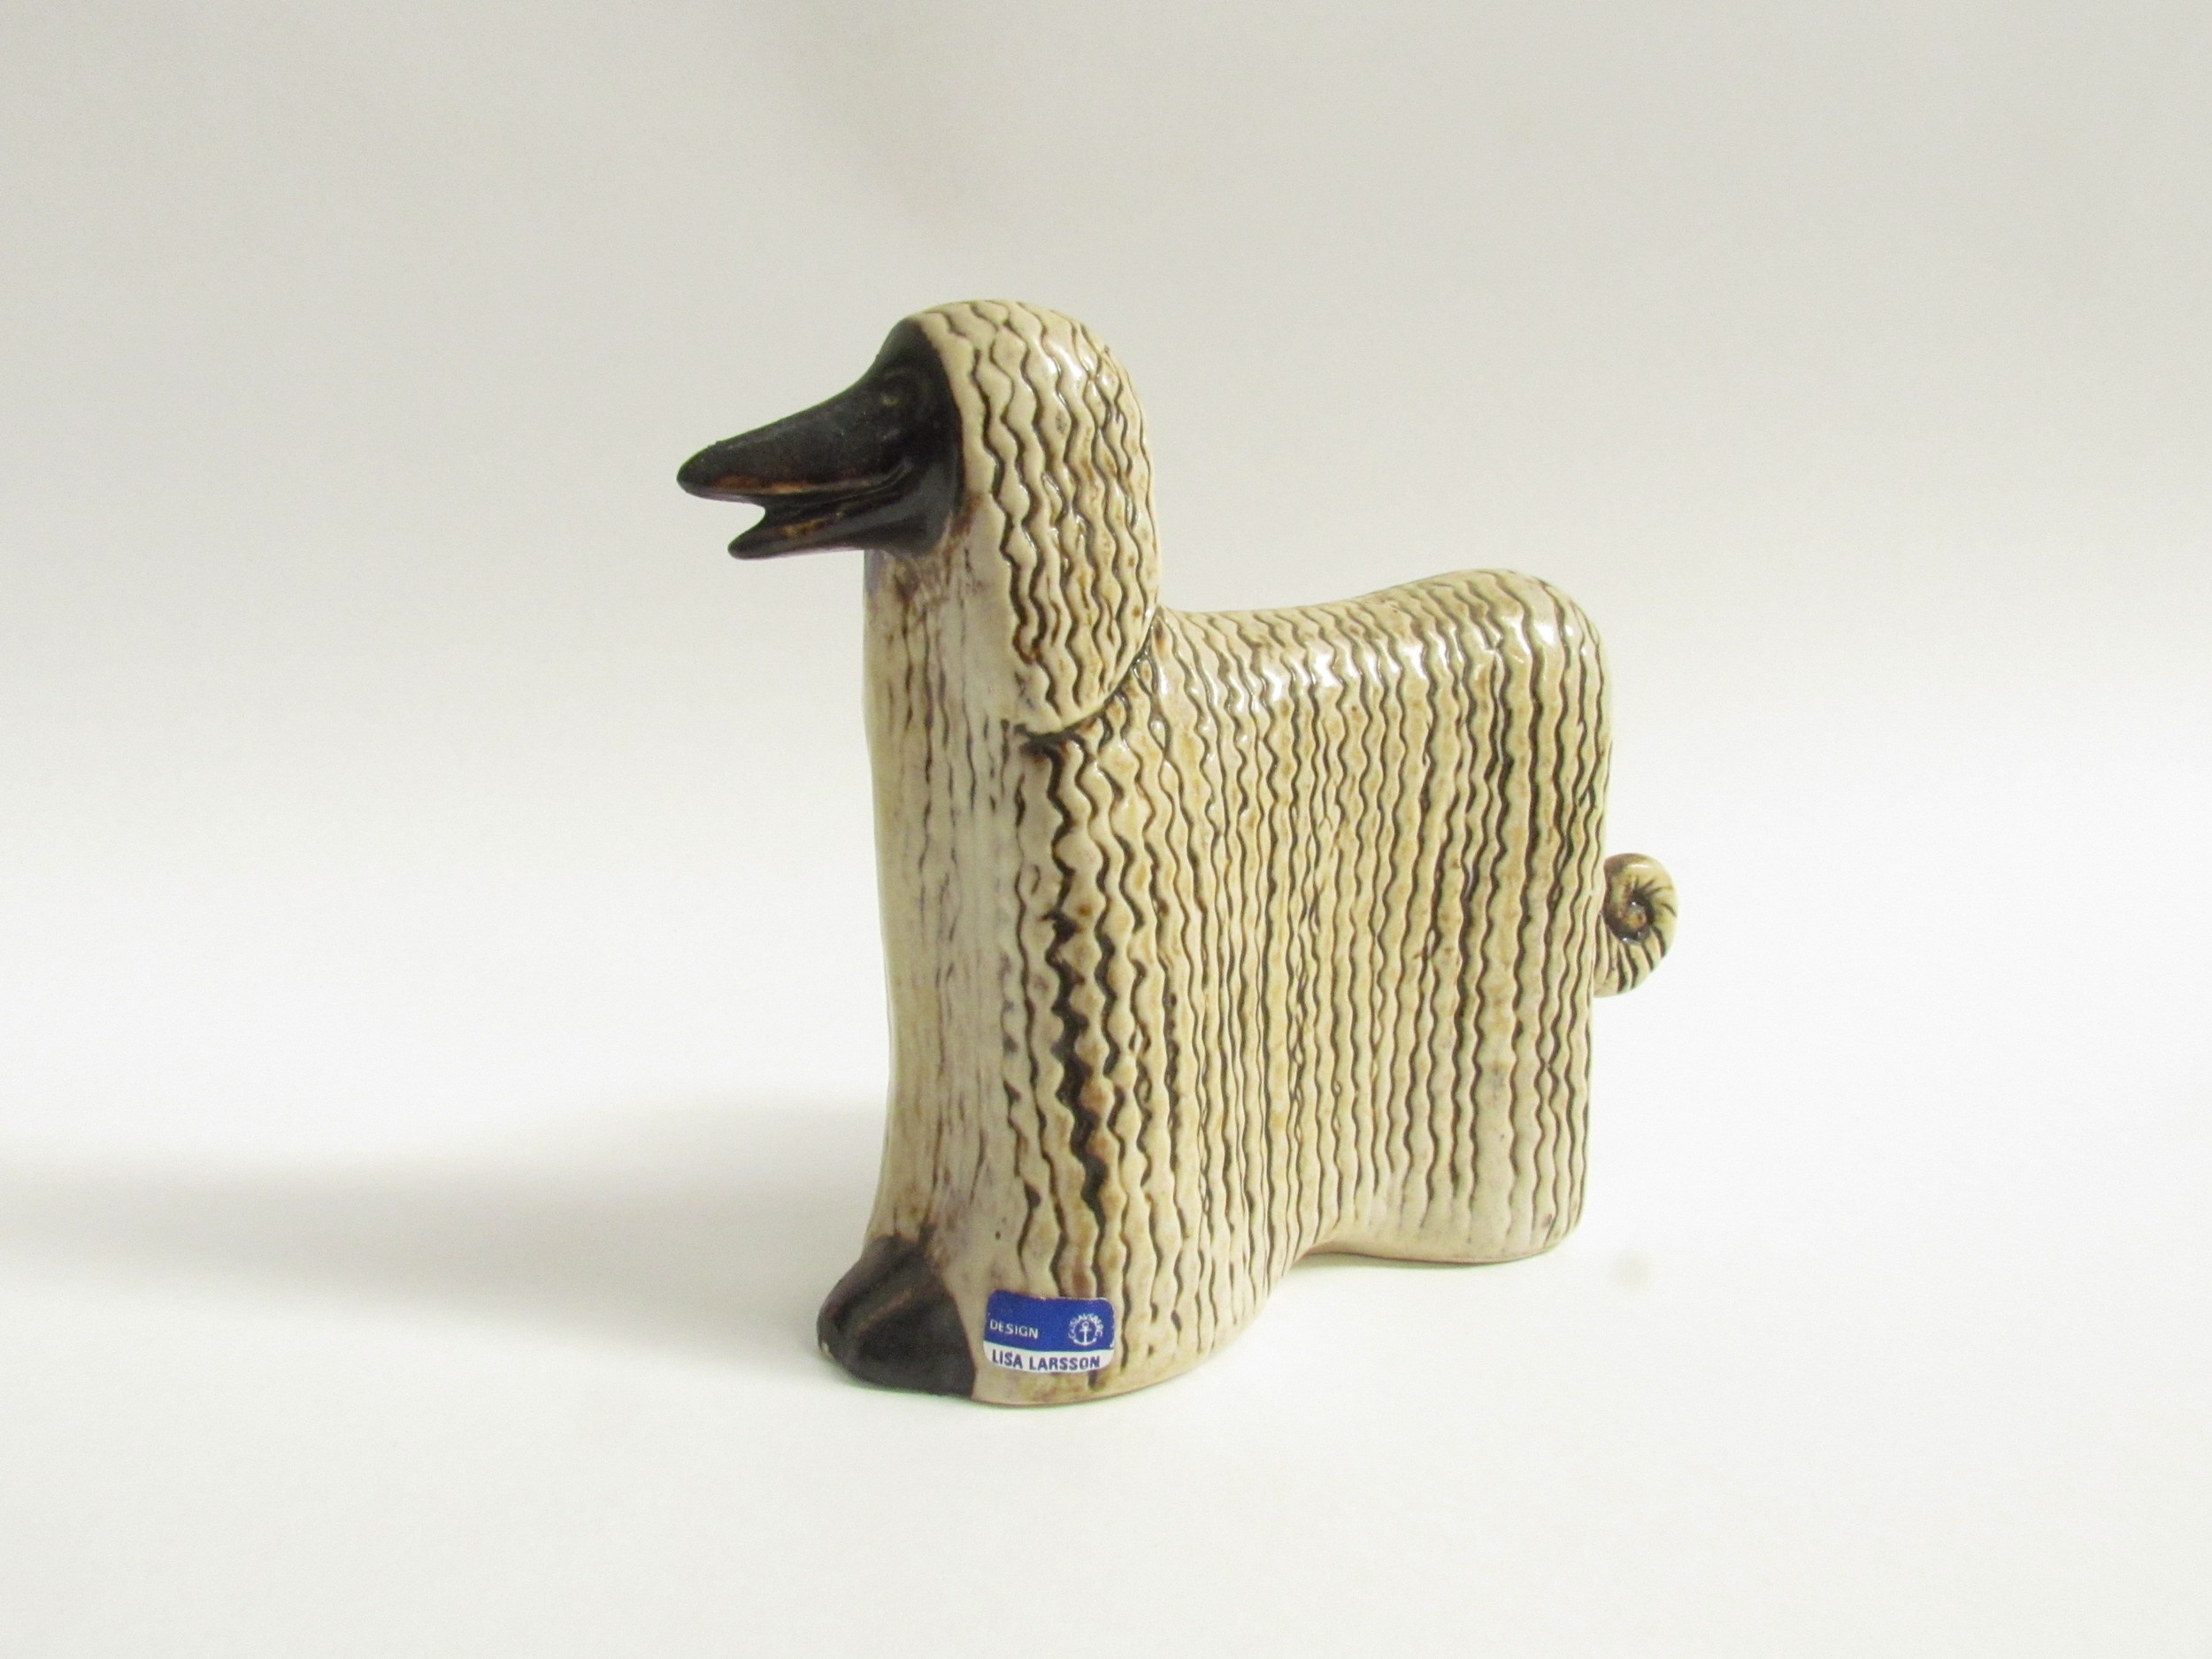 Lisa Larson for Gustavsberg - A ceramic figure of an Afghan Hound. Labelled. 11.5cm high. (Small